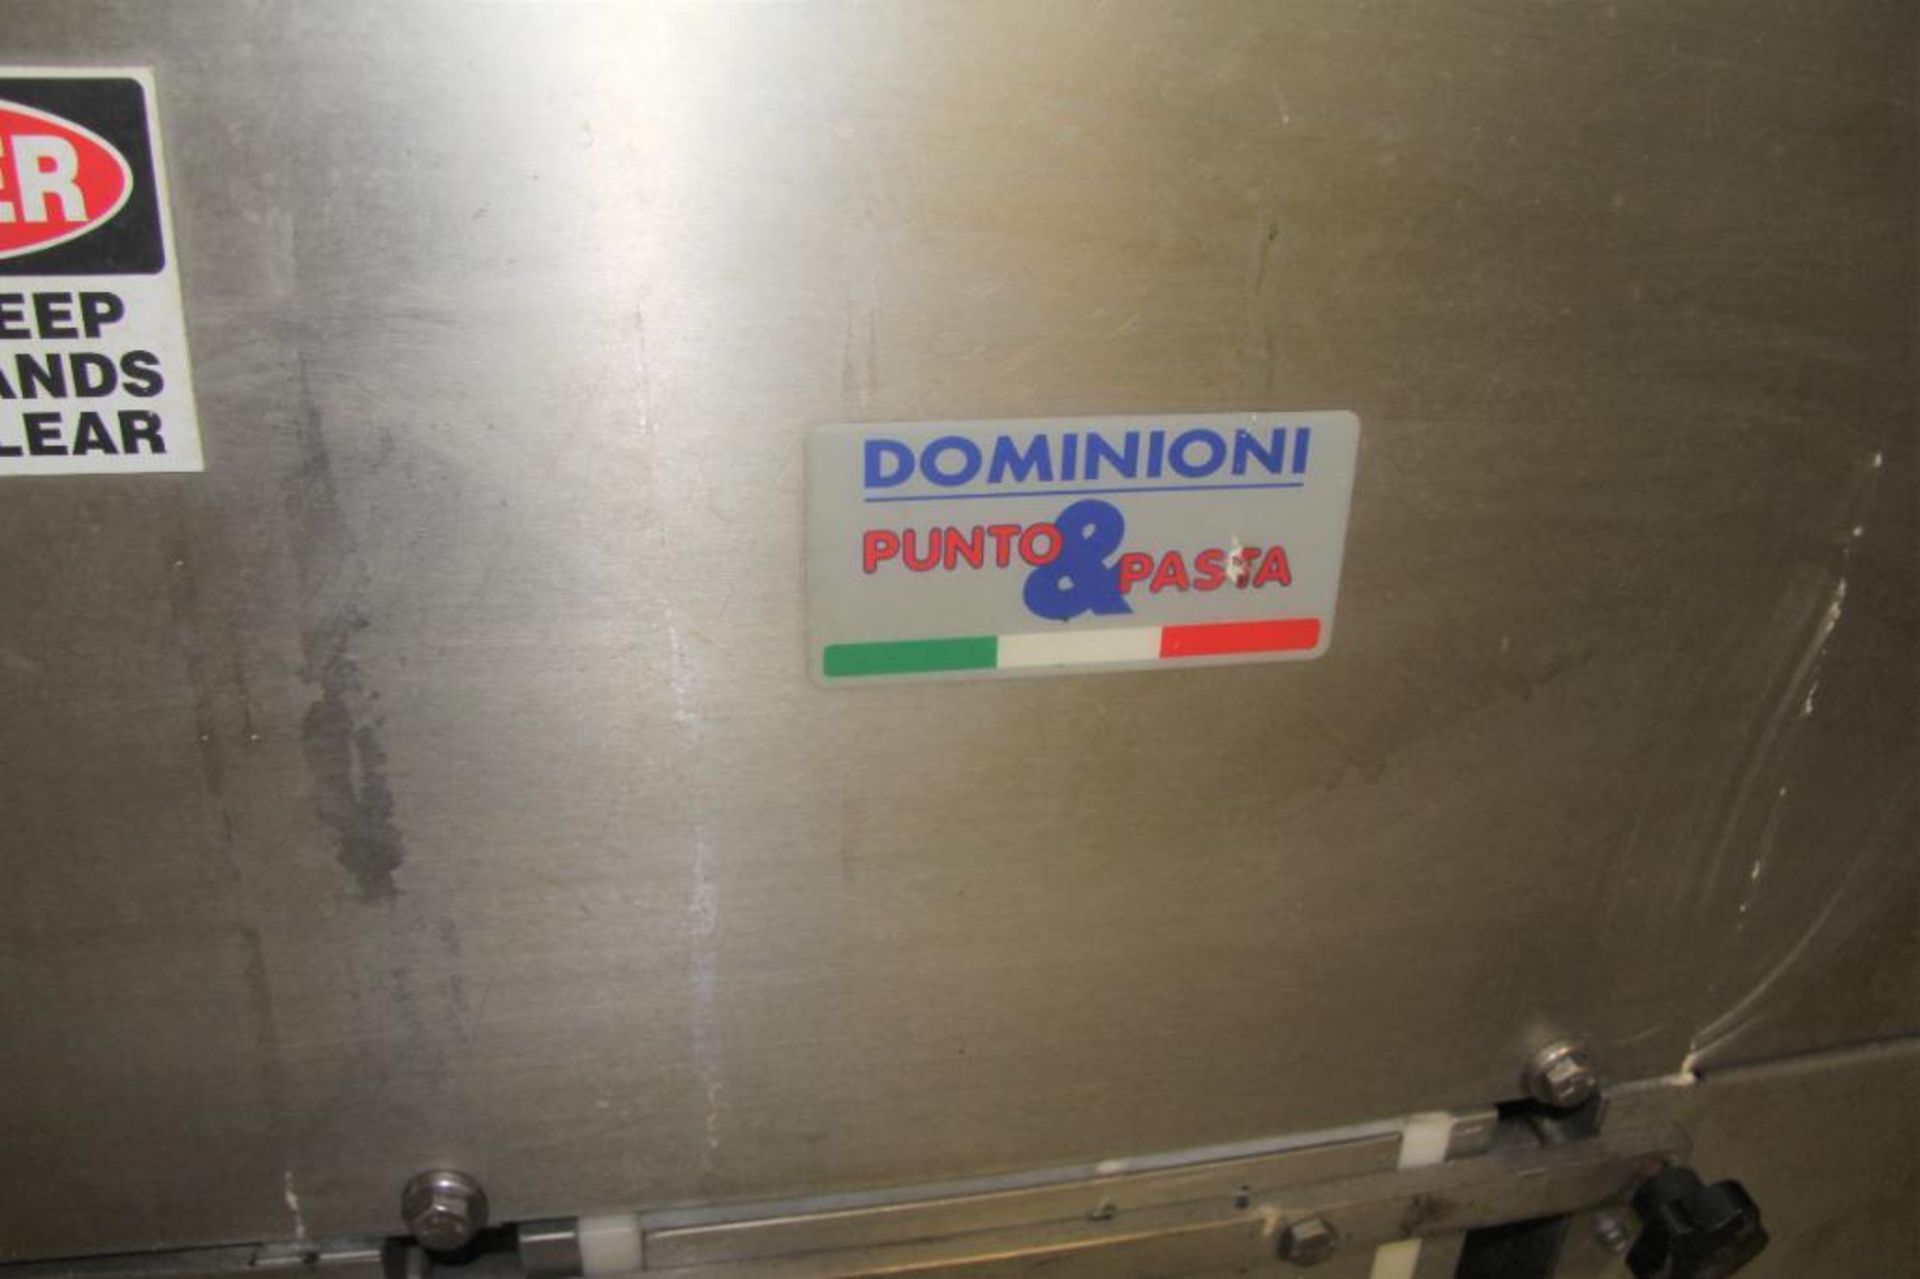 Dominioni Punto & Pasta, Mdl. A250V, Automatic Pasta Sheeter With Mixer - Image 4 of 10